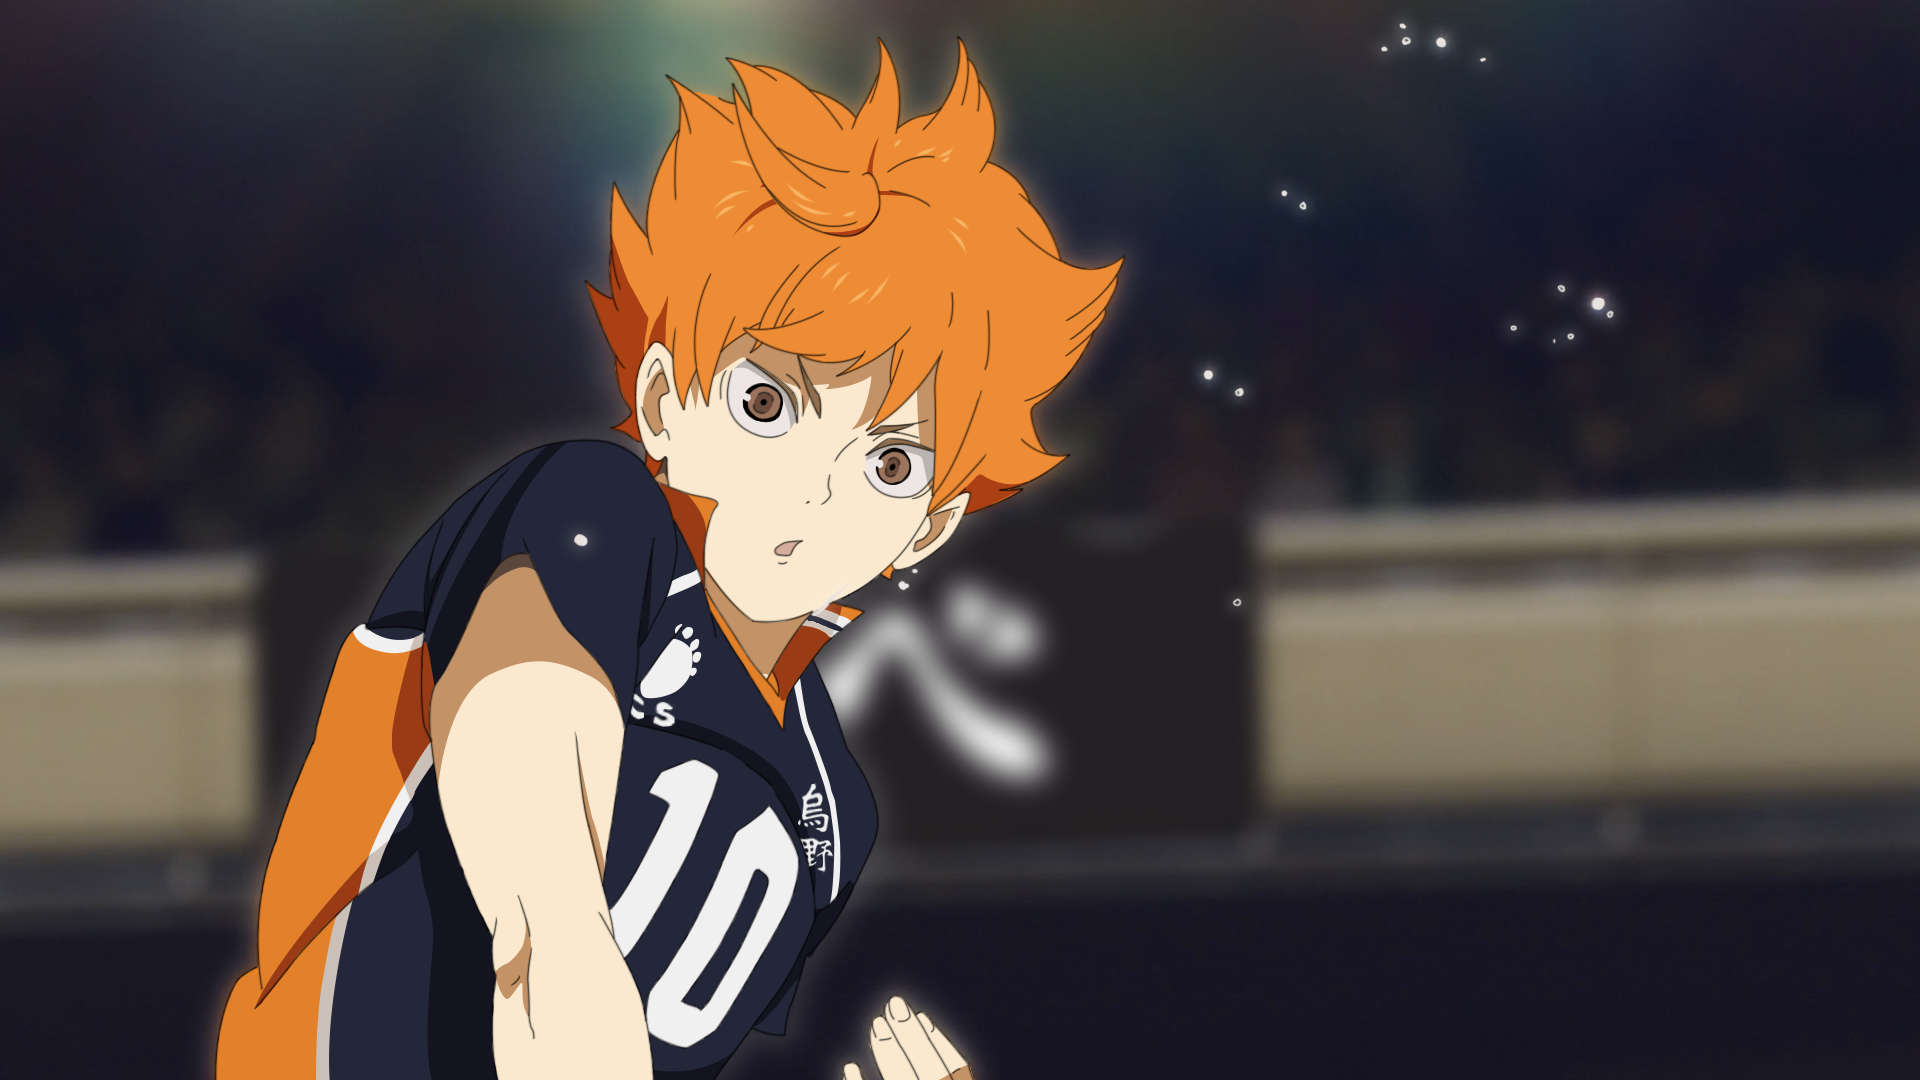 Made this Hinata wallpaper from the opening of the new season! Hope you guys like it!